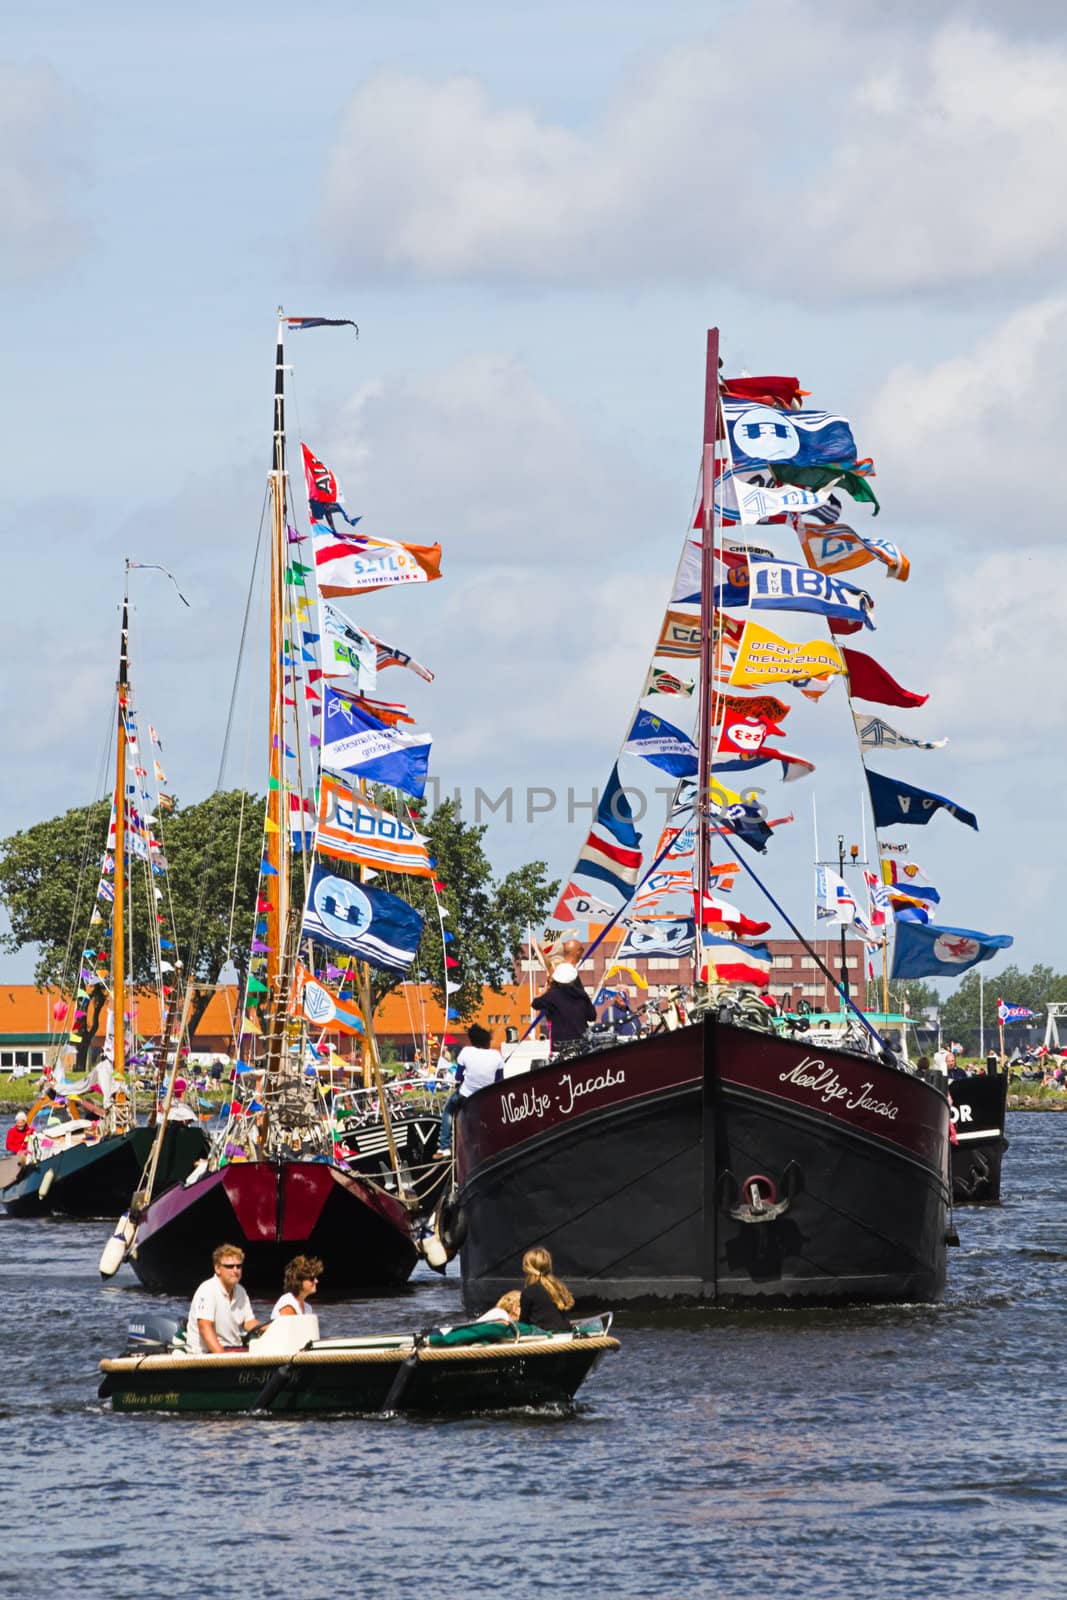 Sail Amsterdam 2010 - The Sail-in Parade by Colette